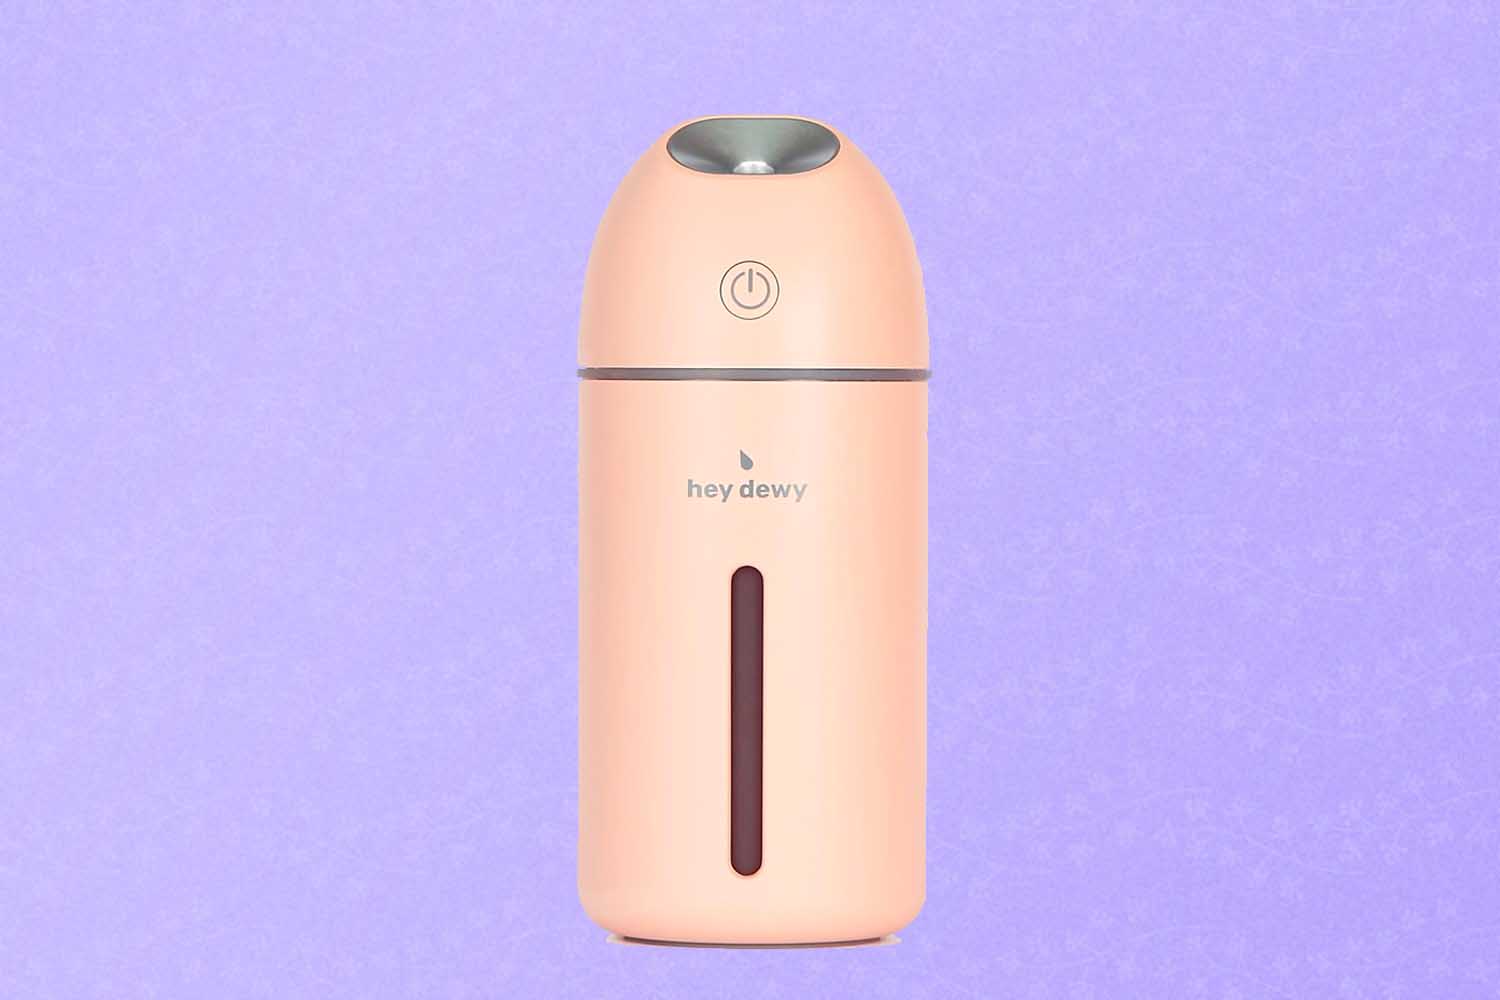 Portable air purifier, a perfect Mother's Day gift for 2022, on a purple background.